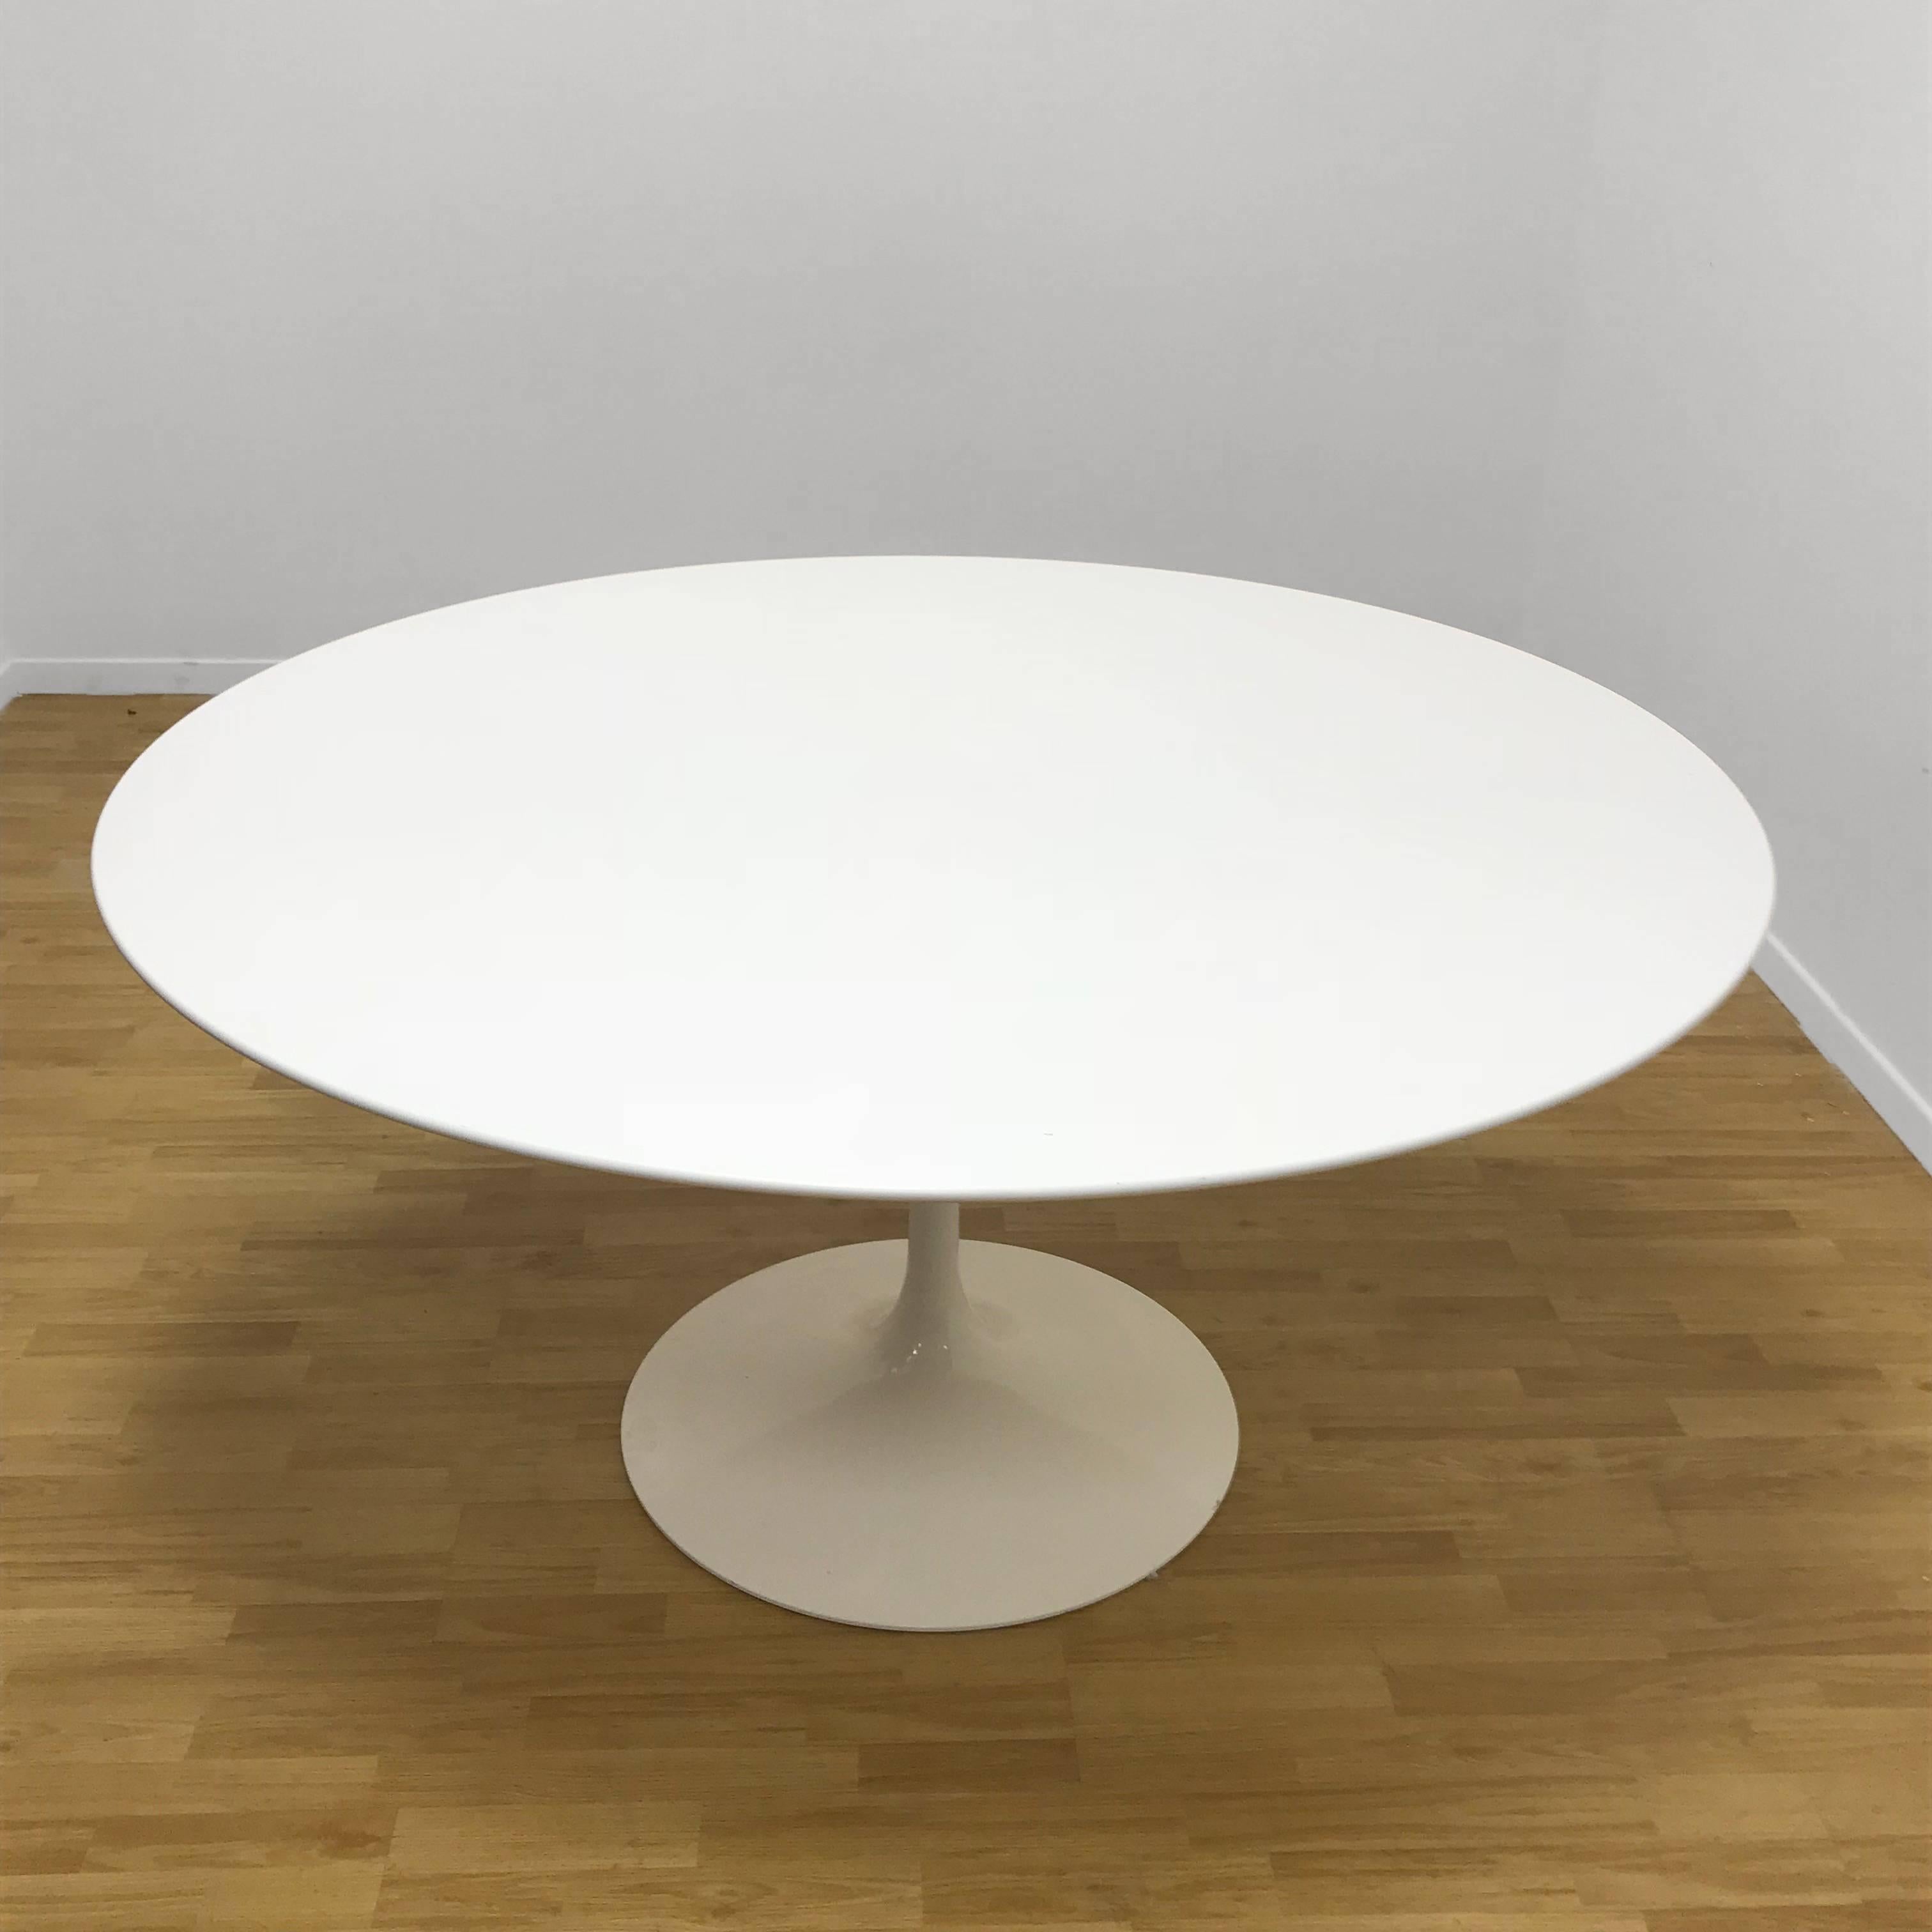 Eero Saarinen (1910-1961) original tulip table by Eero Saarinen Signed Knoll Studio. This iconic item was produced during 1970s.

This round dining table is made of white laminated plastic and aluminium.

One of the most famous pieces of design